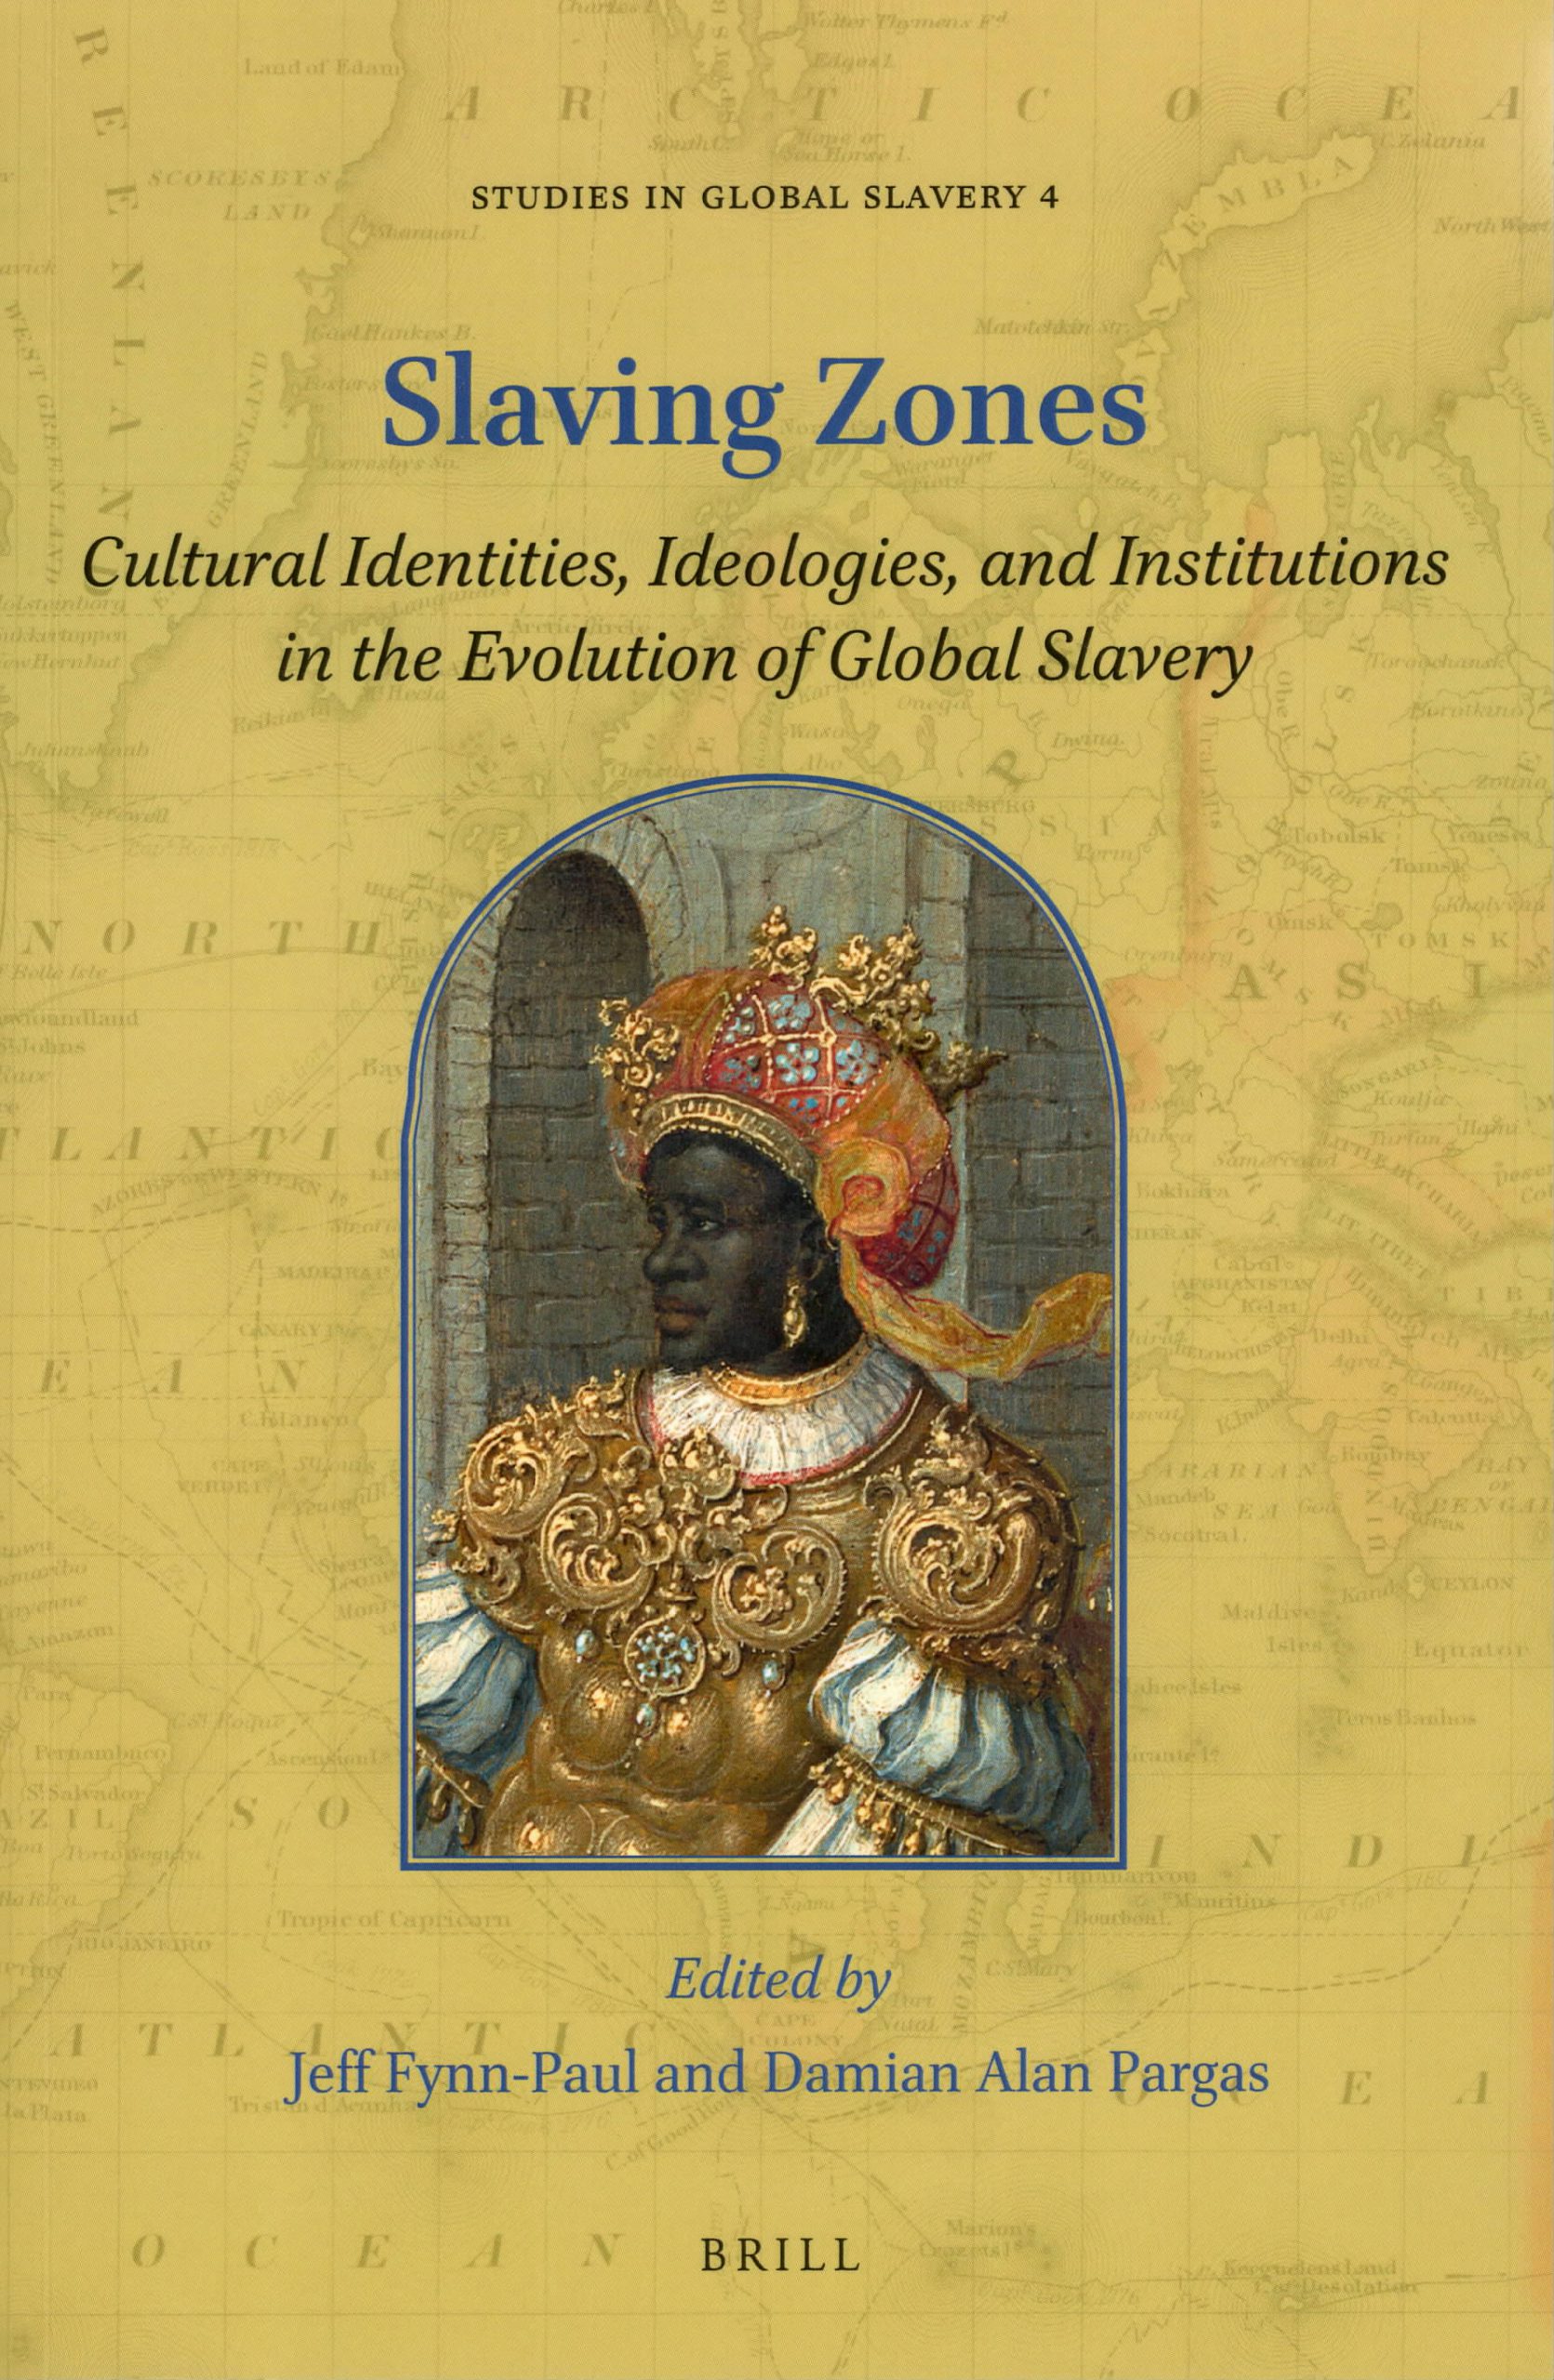 Slaving zones: cultural identities, ideologies, and institutions in the evolution of global slavery￼